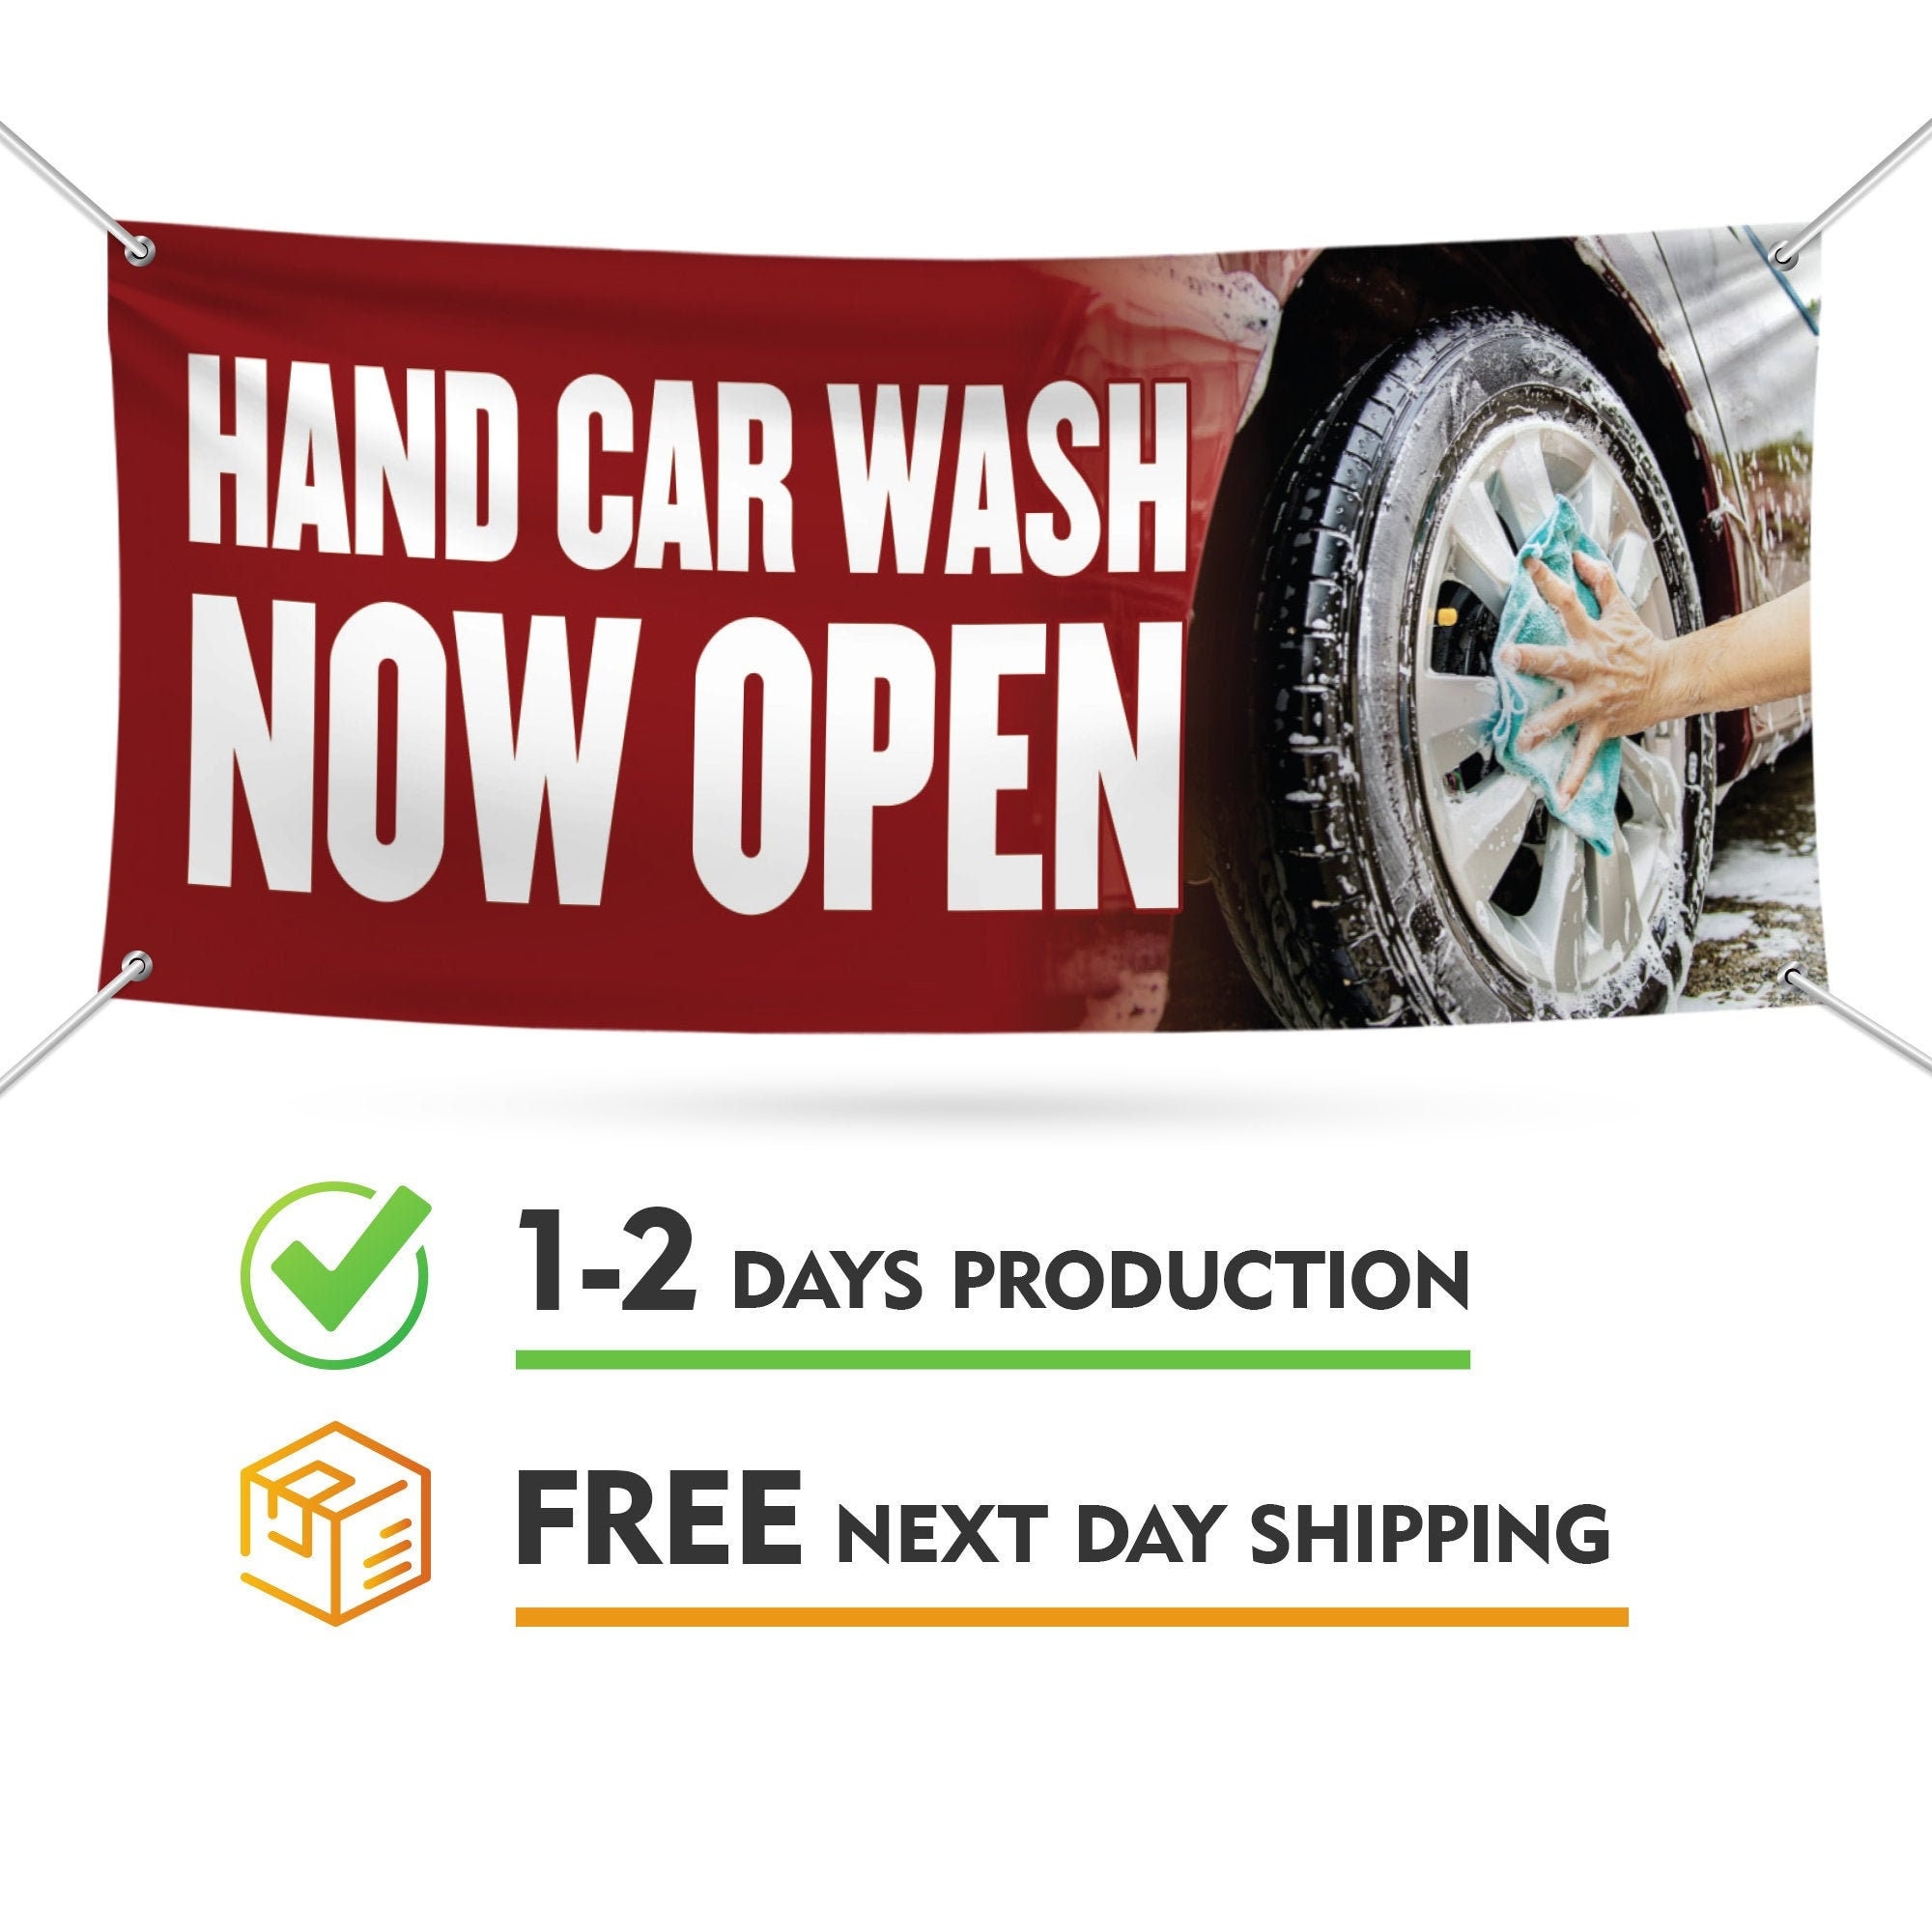 13 oz Banner Heavy-Duty Vinyl Single-Sided with Metal Grommets Non-Fabric Car Wash Open Phone Number